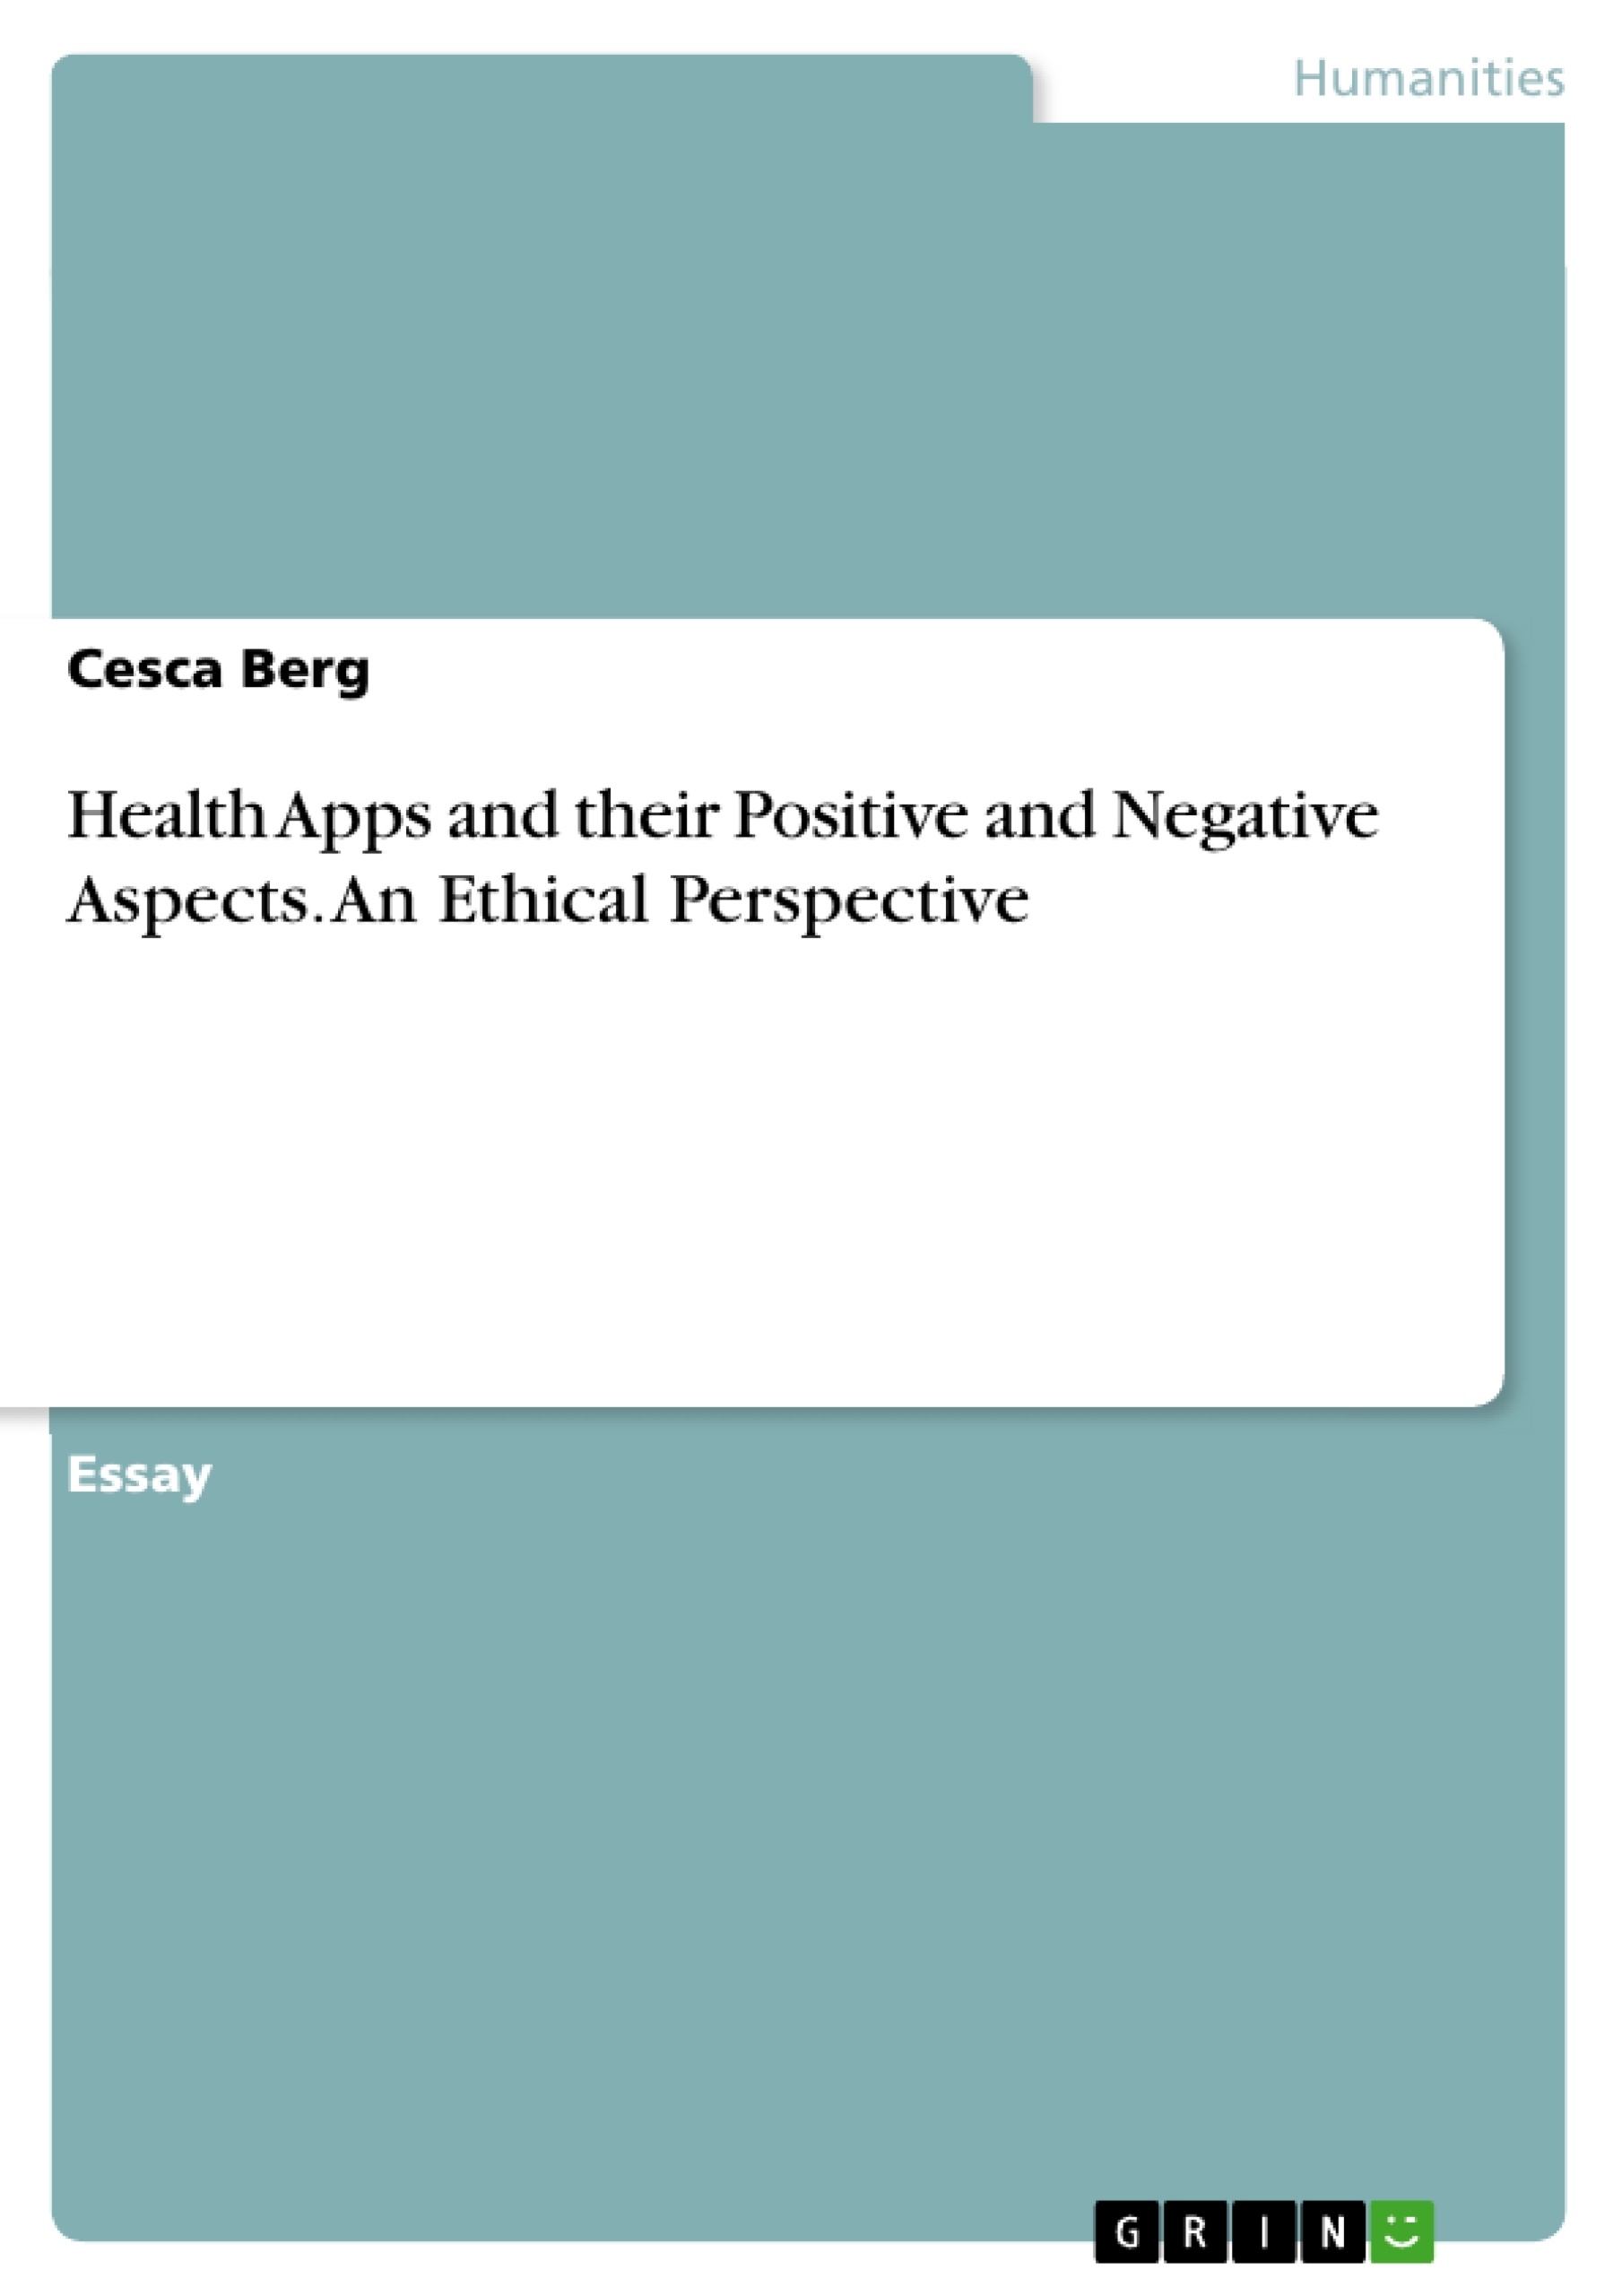 Title: Health Apps and their Positive and Negative Aspects. An Ethical Perspective